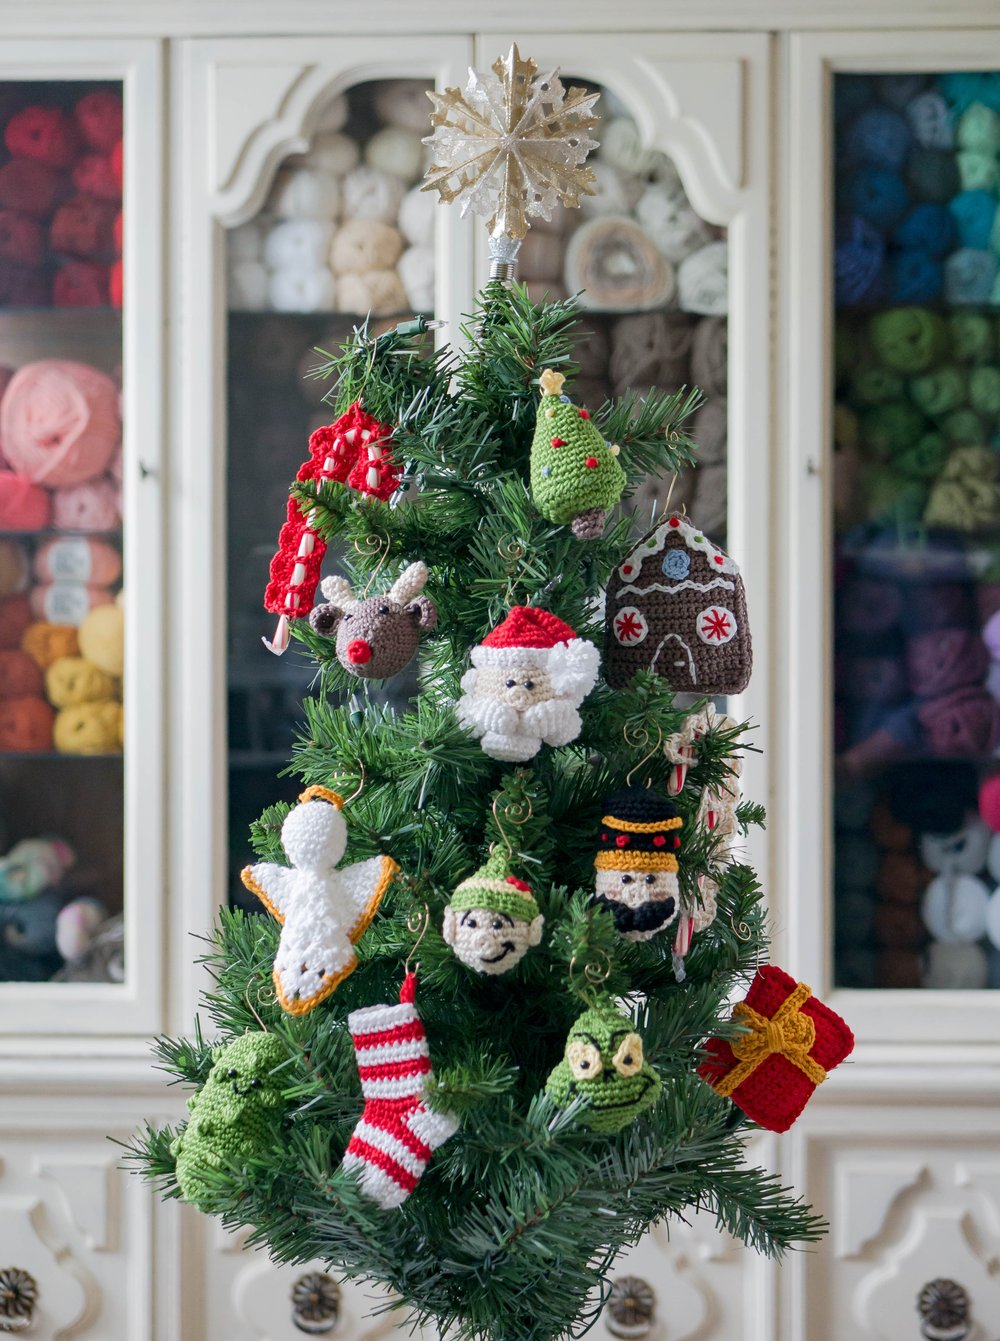 10 Crochet Christmas Ornaments to Decorate Your Tree